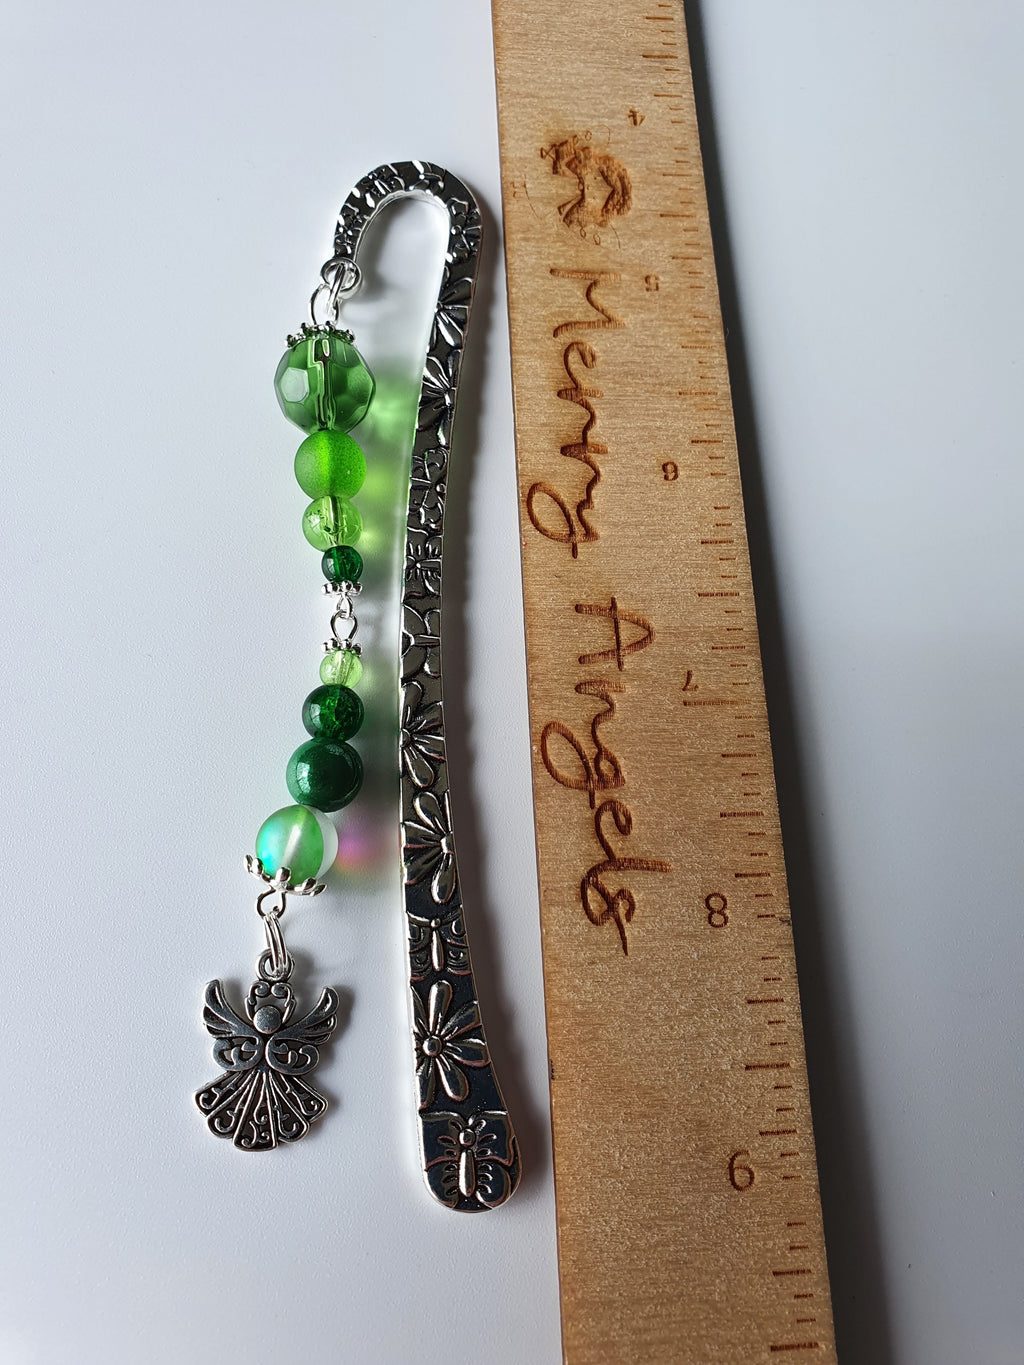 This is a picture of a silver bookmark with green beads and a silver angel